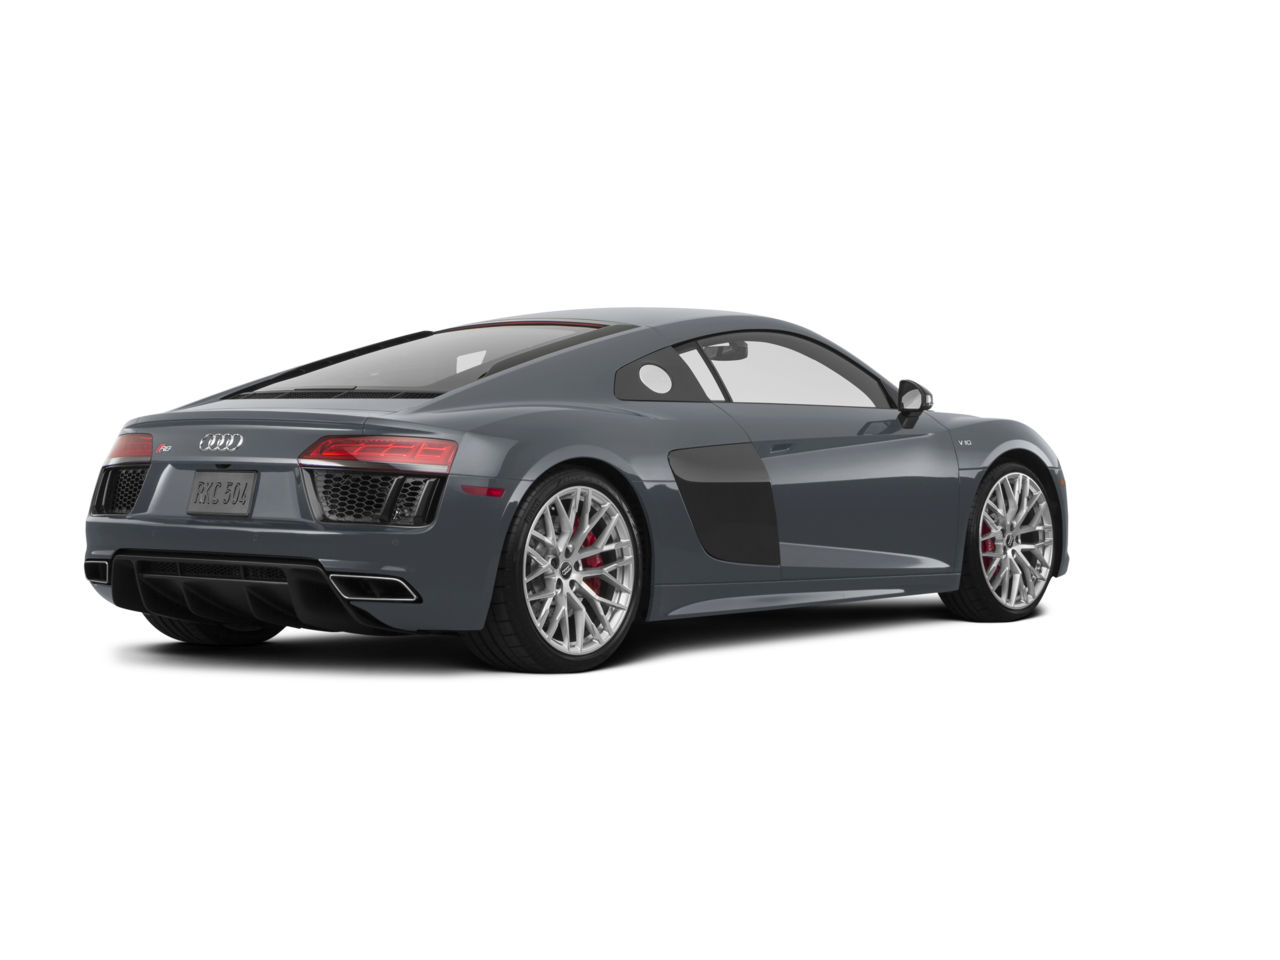 Audi R8 Background PNG Image